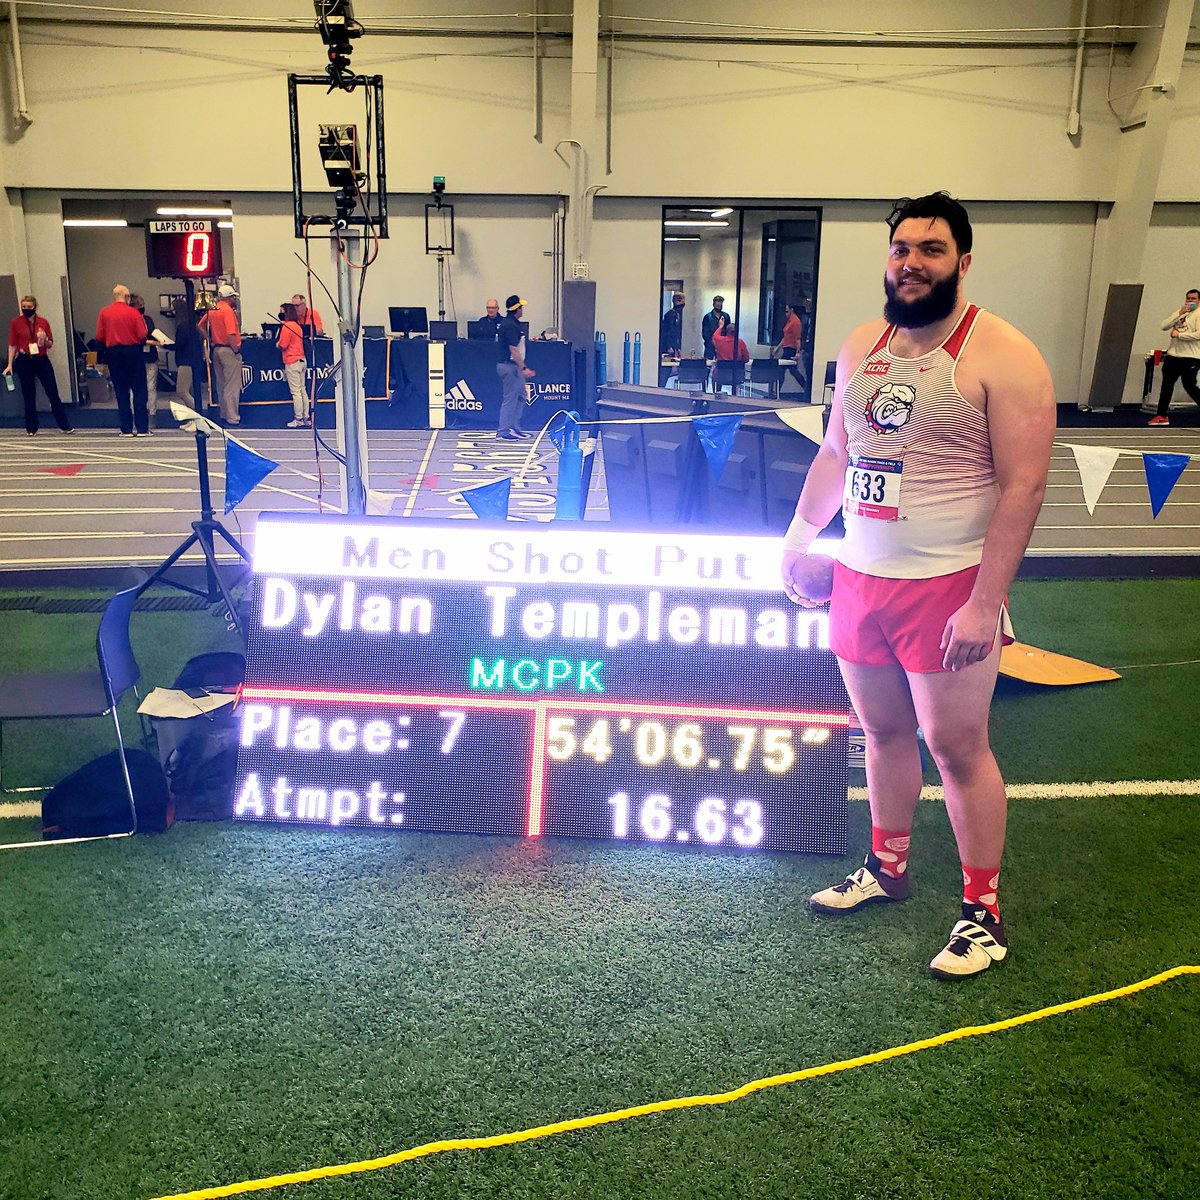 🚨🚨 ALL-AMERICAN ALERT🚨🚨

Dylan Templeman finishes 7th overall to bring home his first indoor All-American award, first Shot Put All-American, Personal Best and School Record!!! #BIGTOSS #AllAmerican #WhereMyDogsAt